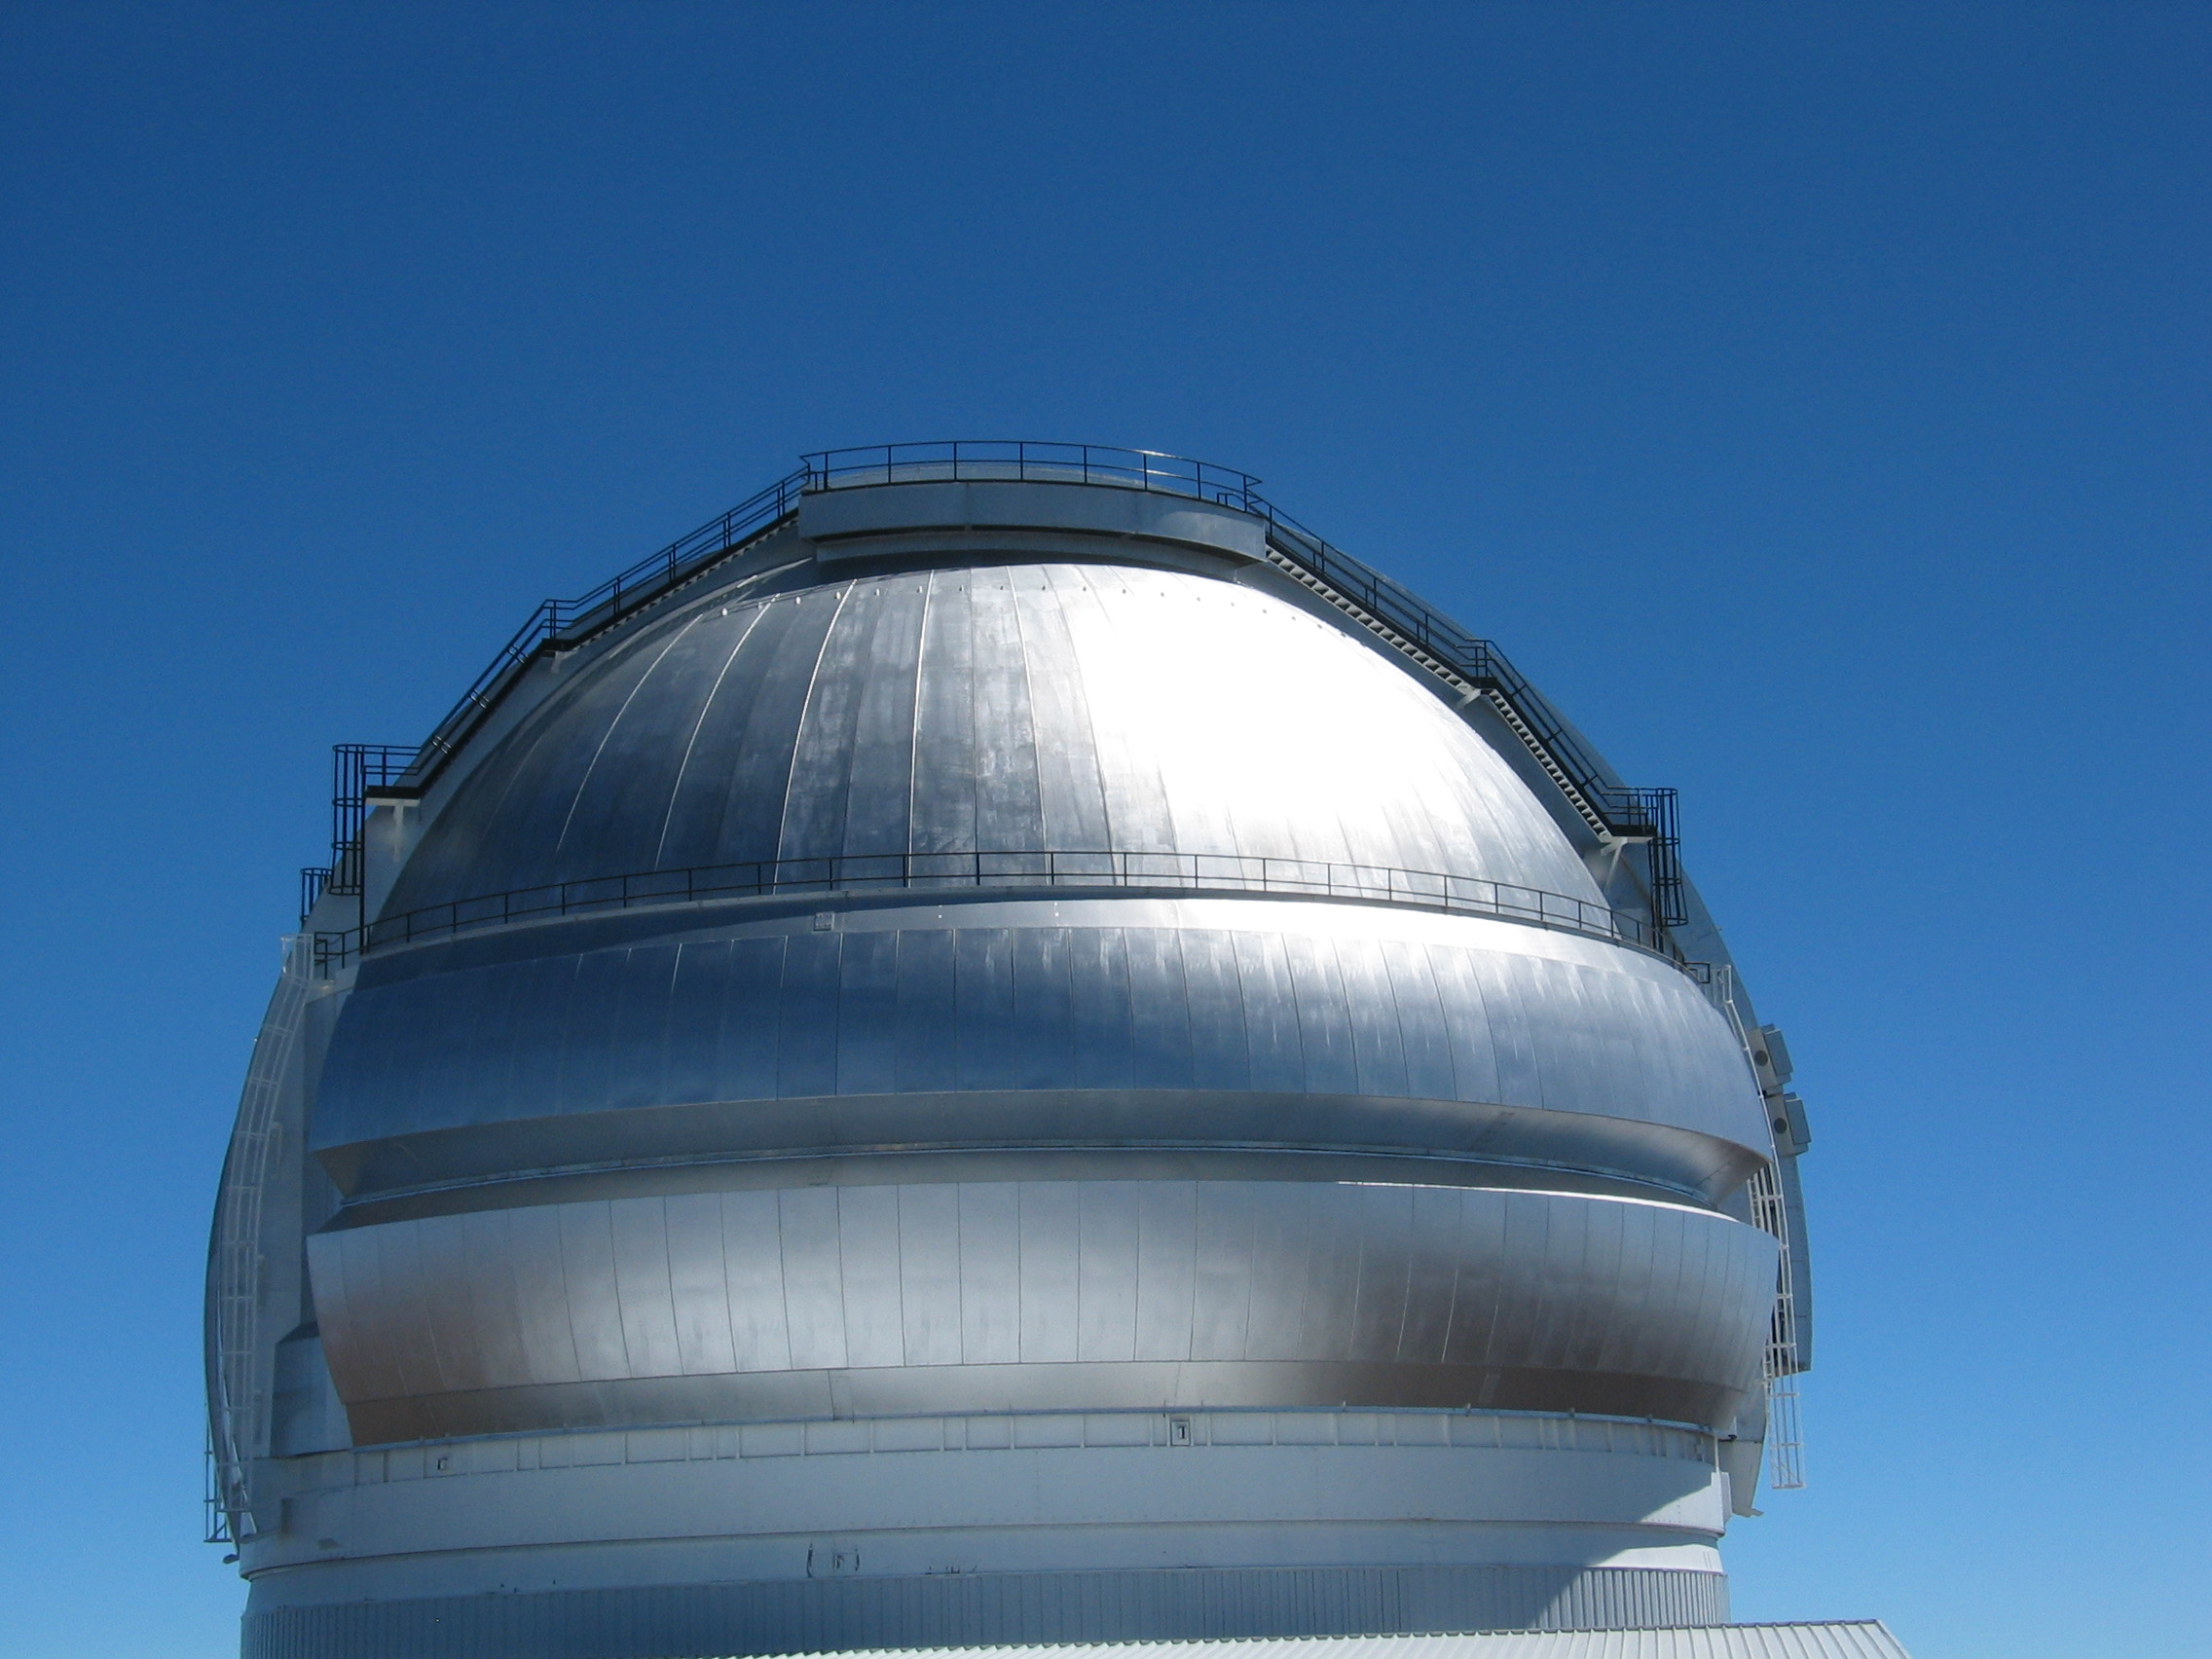 Top of an observatory